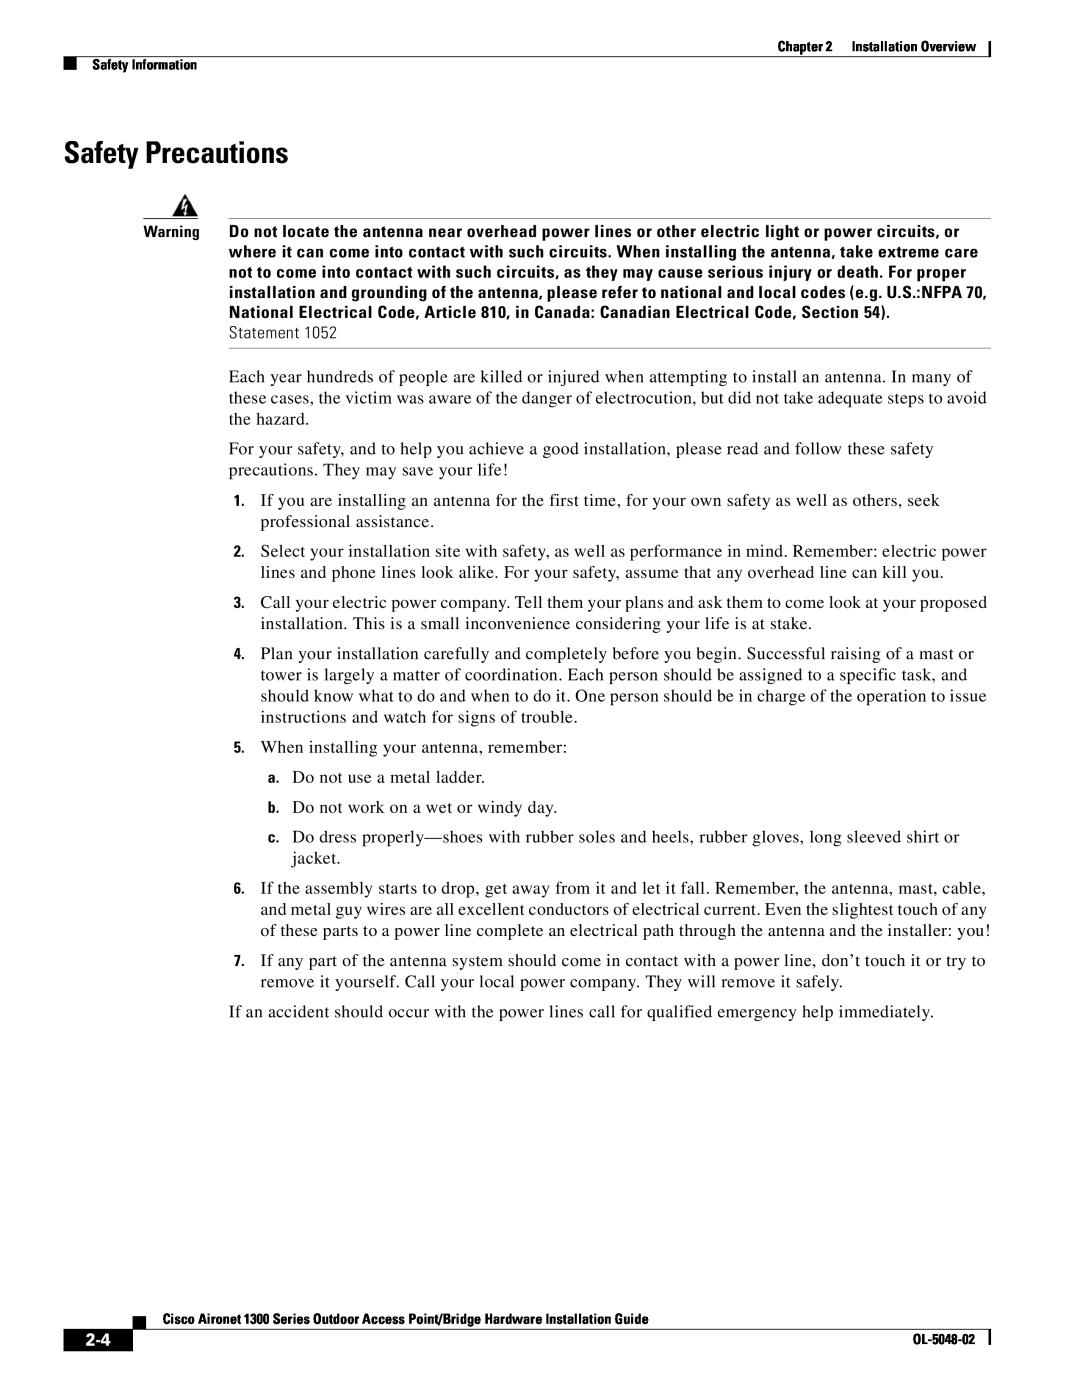 Cisco Systems 1300 Series manual Safety Precautions 